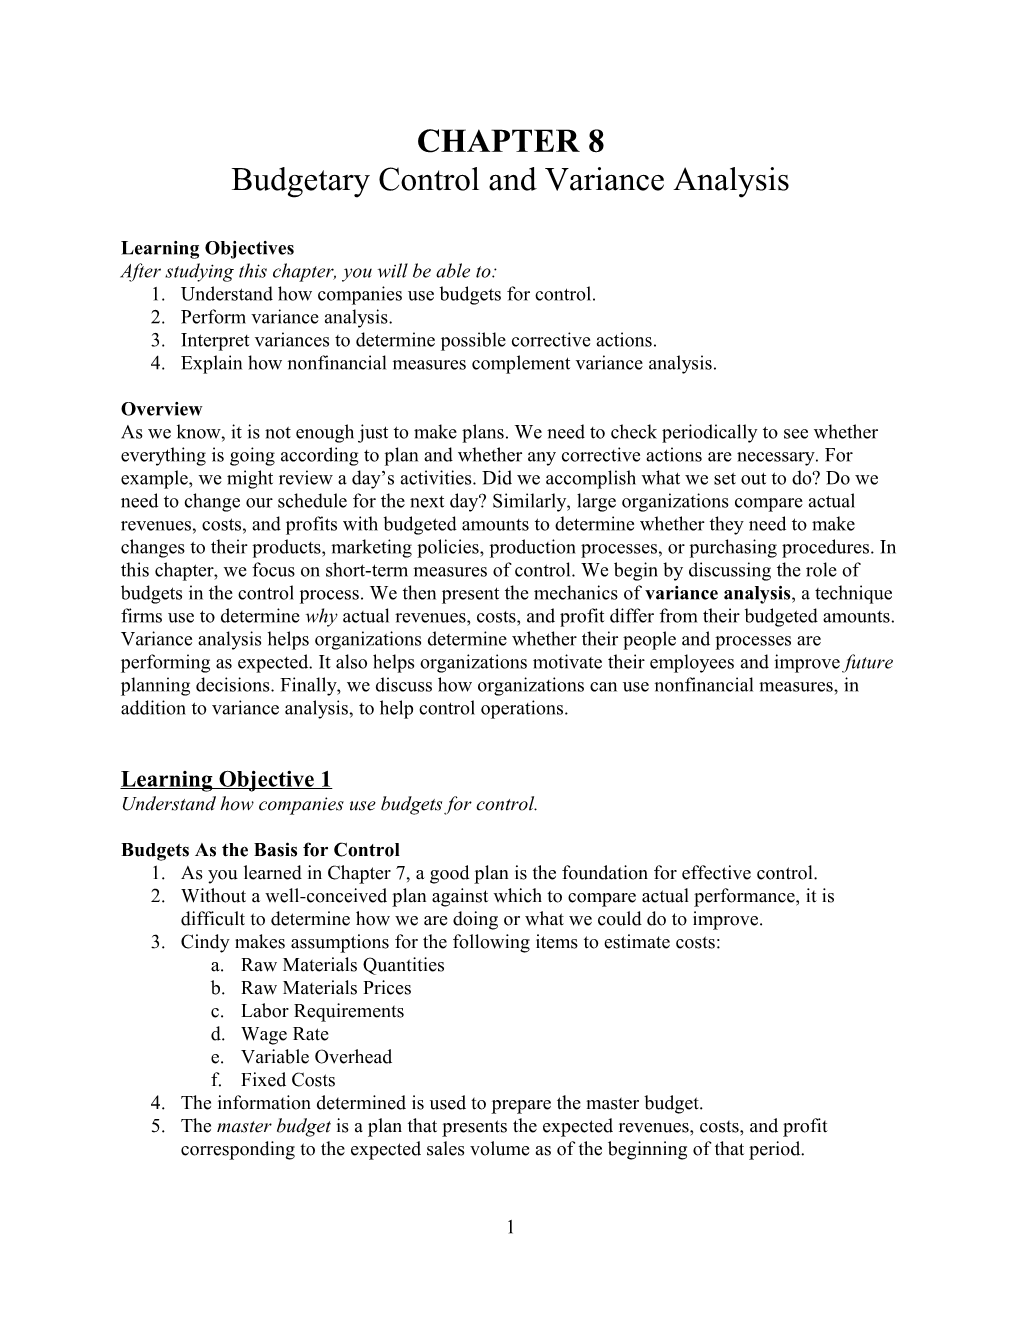 Budgetary Control and Variance Analysis